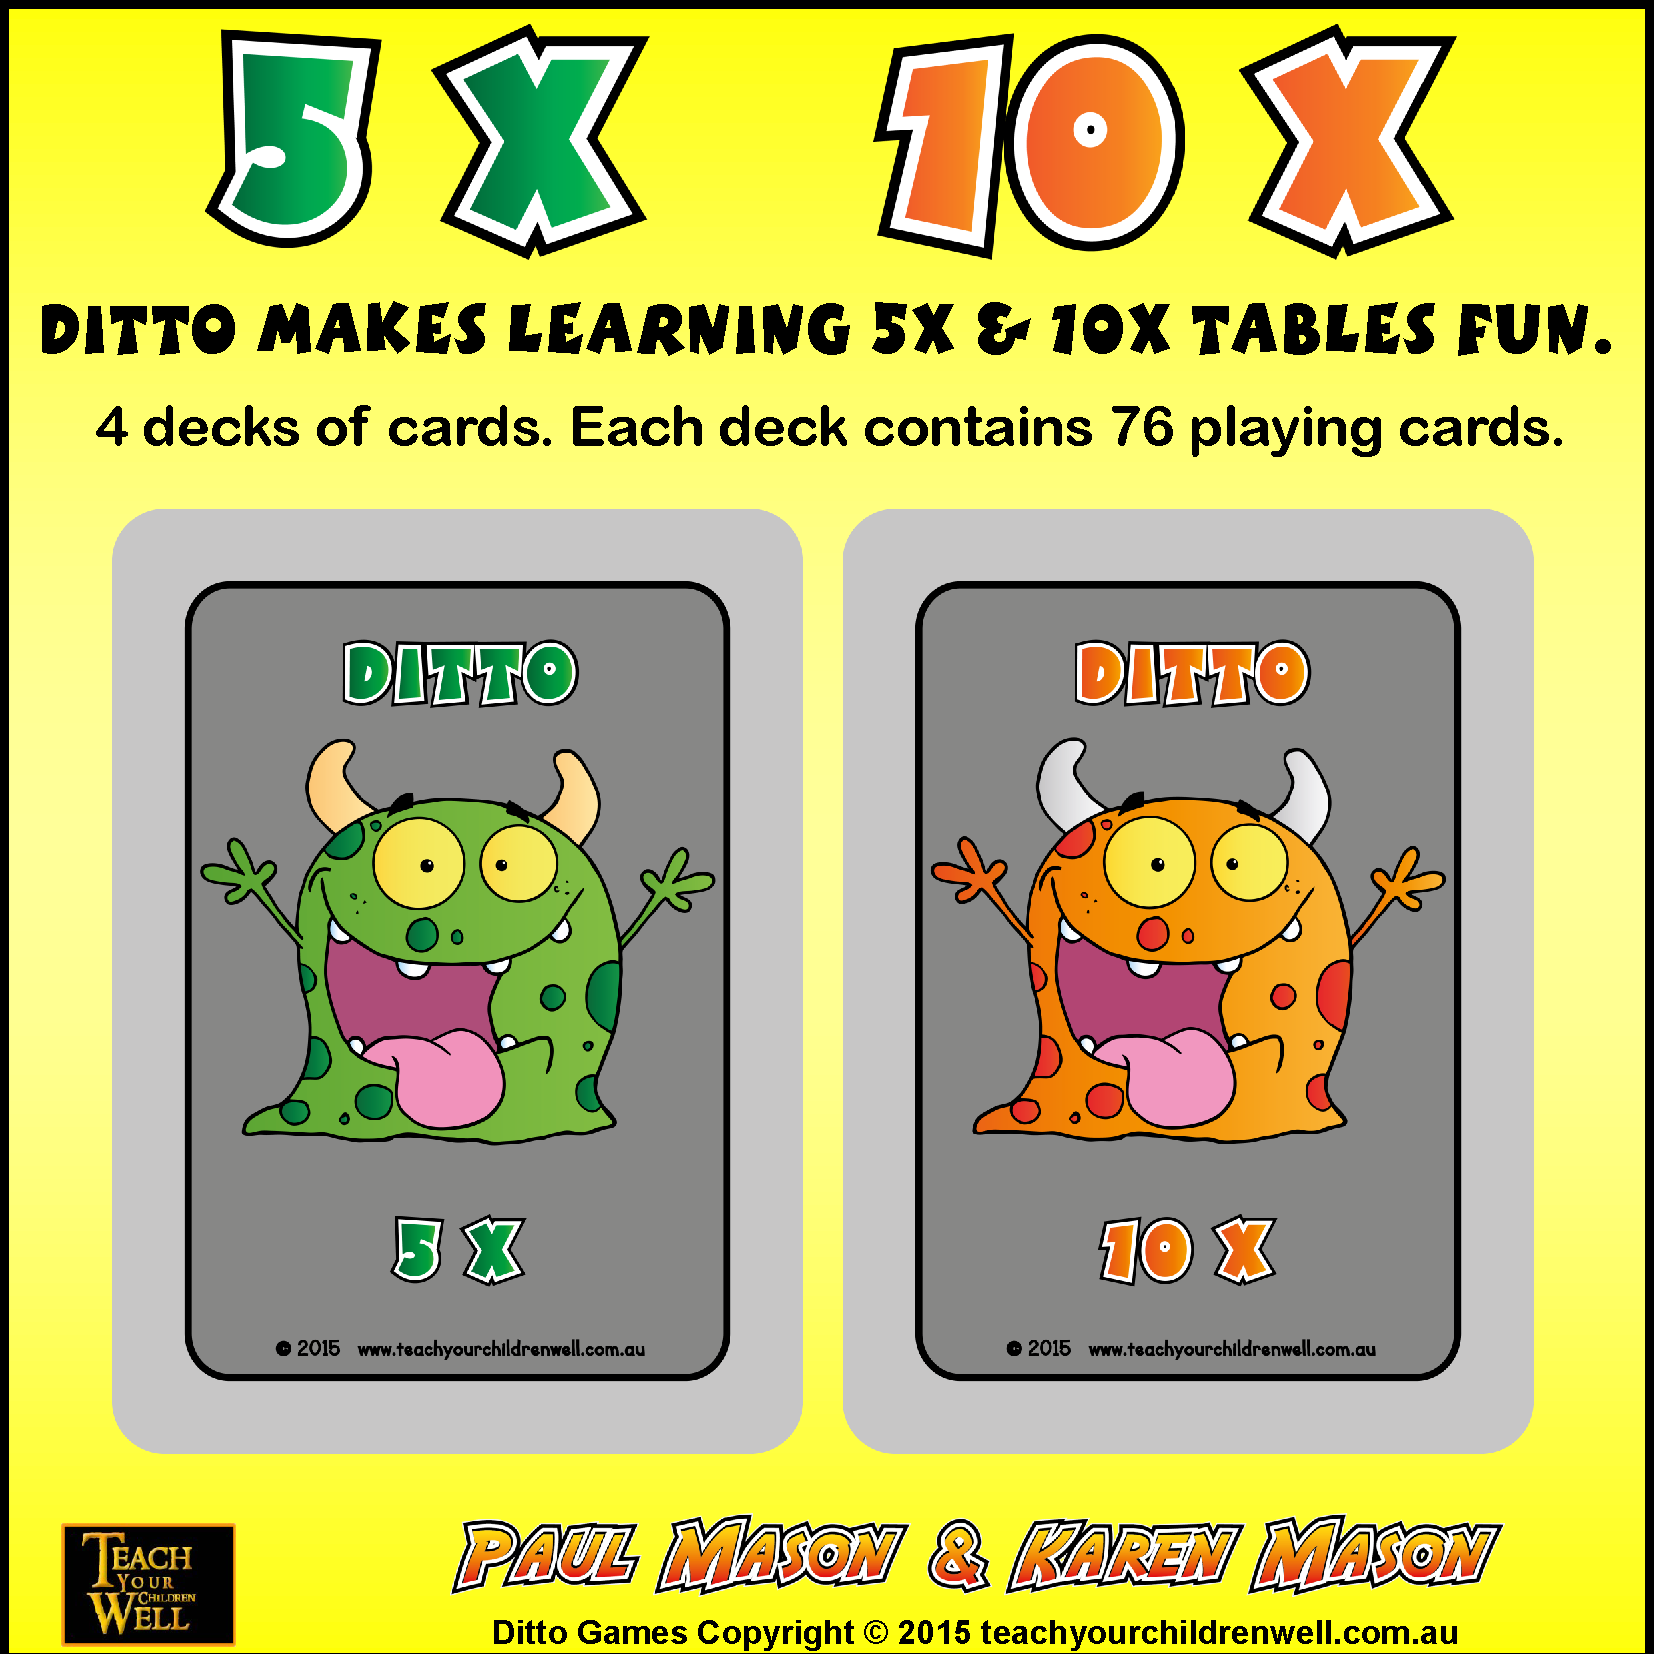 5X AND 10X TABLES FUN WITH DITTO